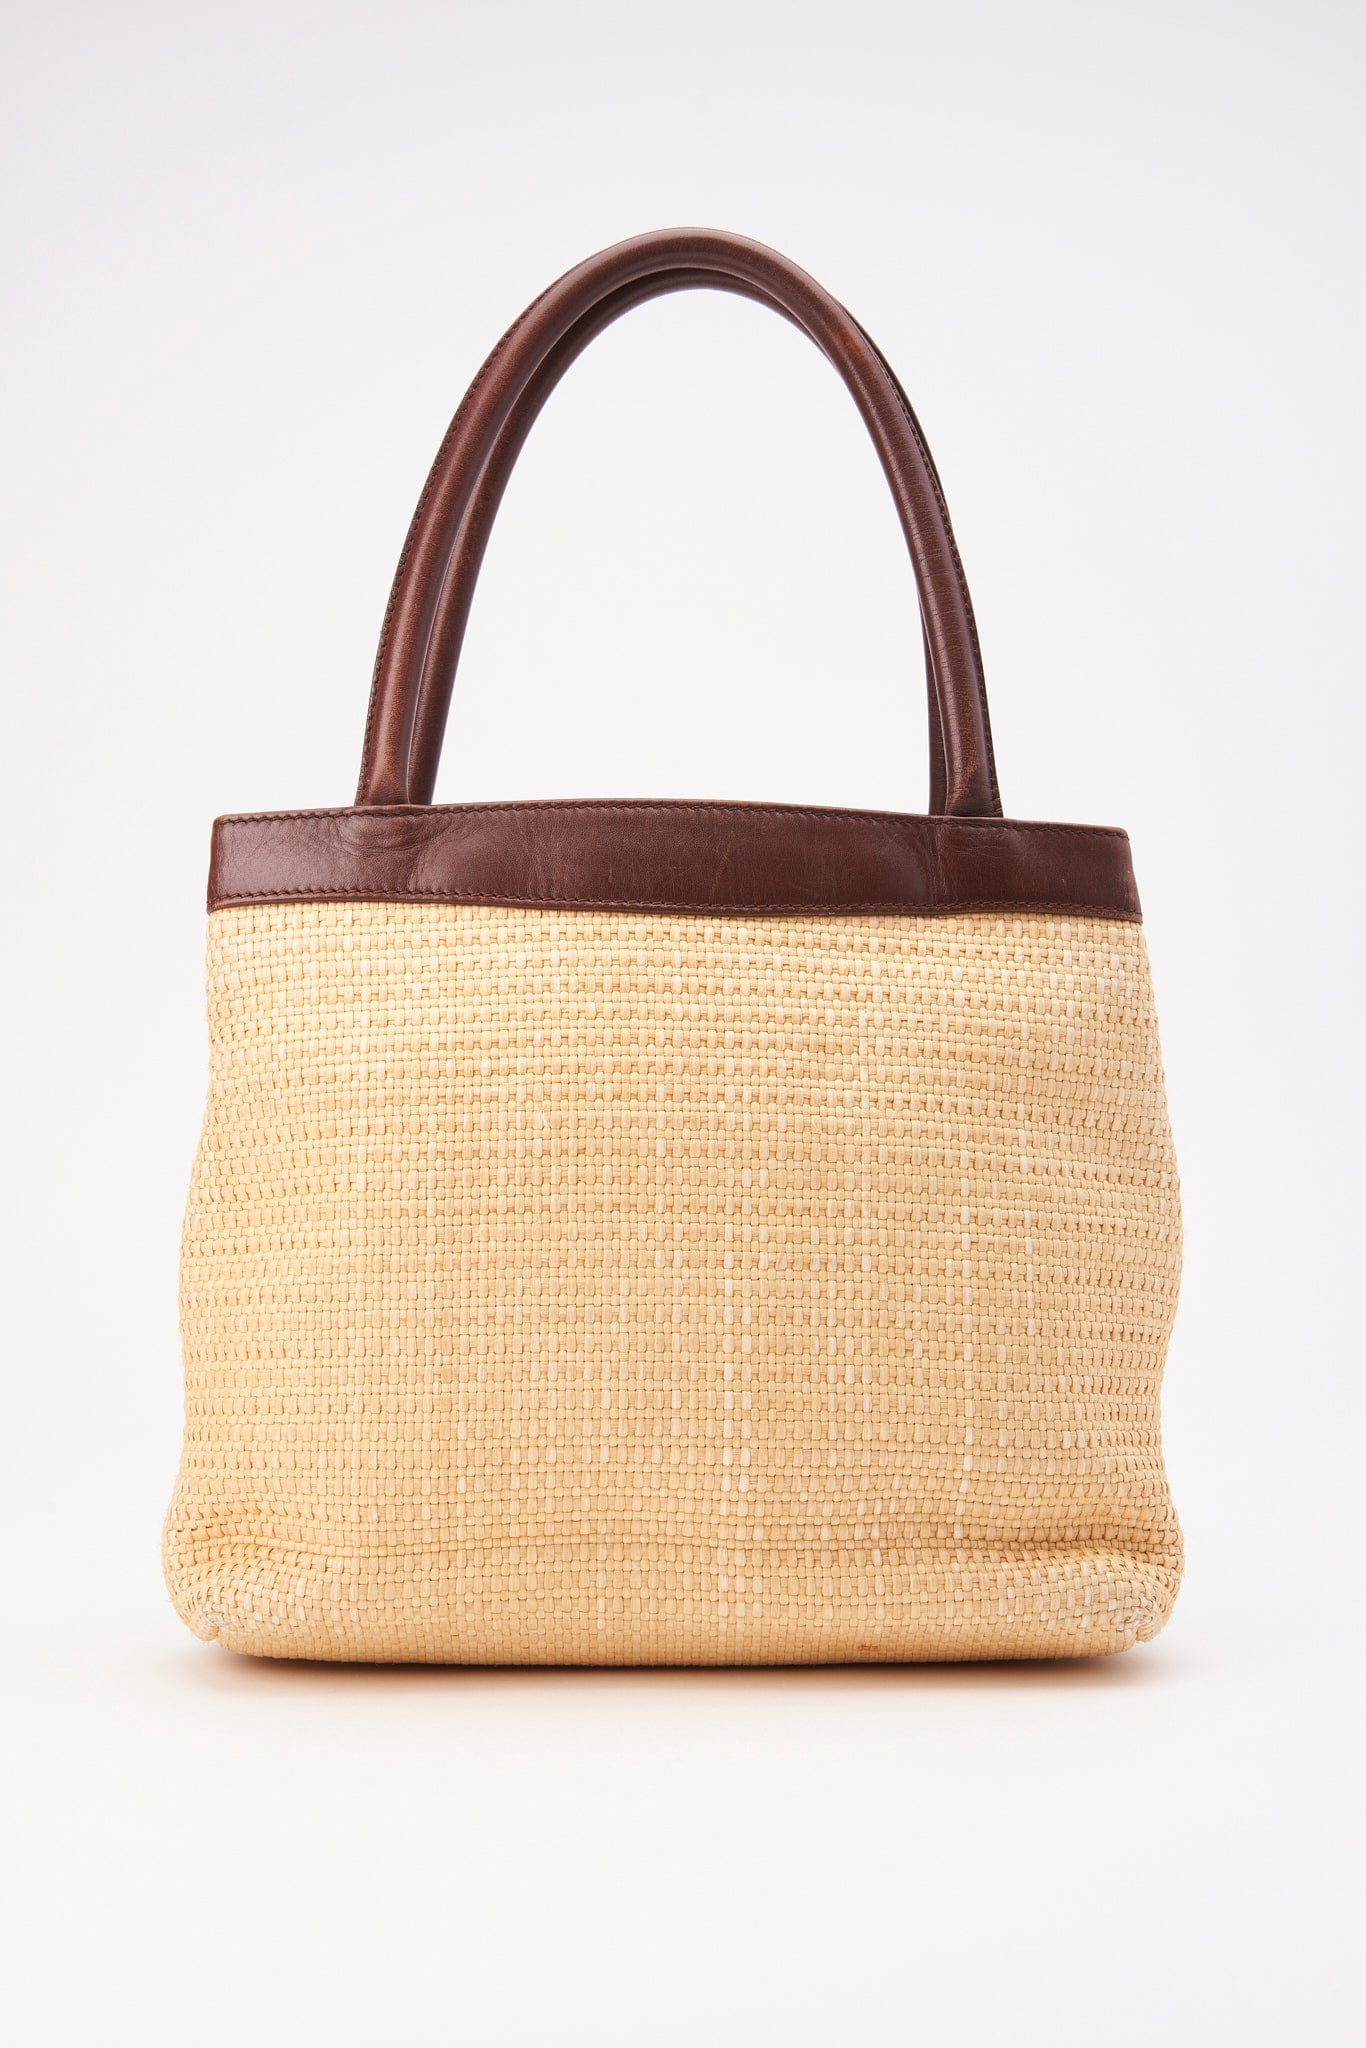 Chanel Raffia Tote Bag With Brown Leather Handles